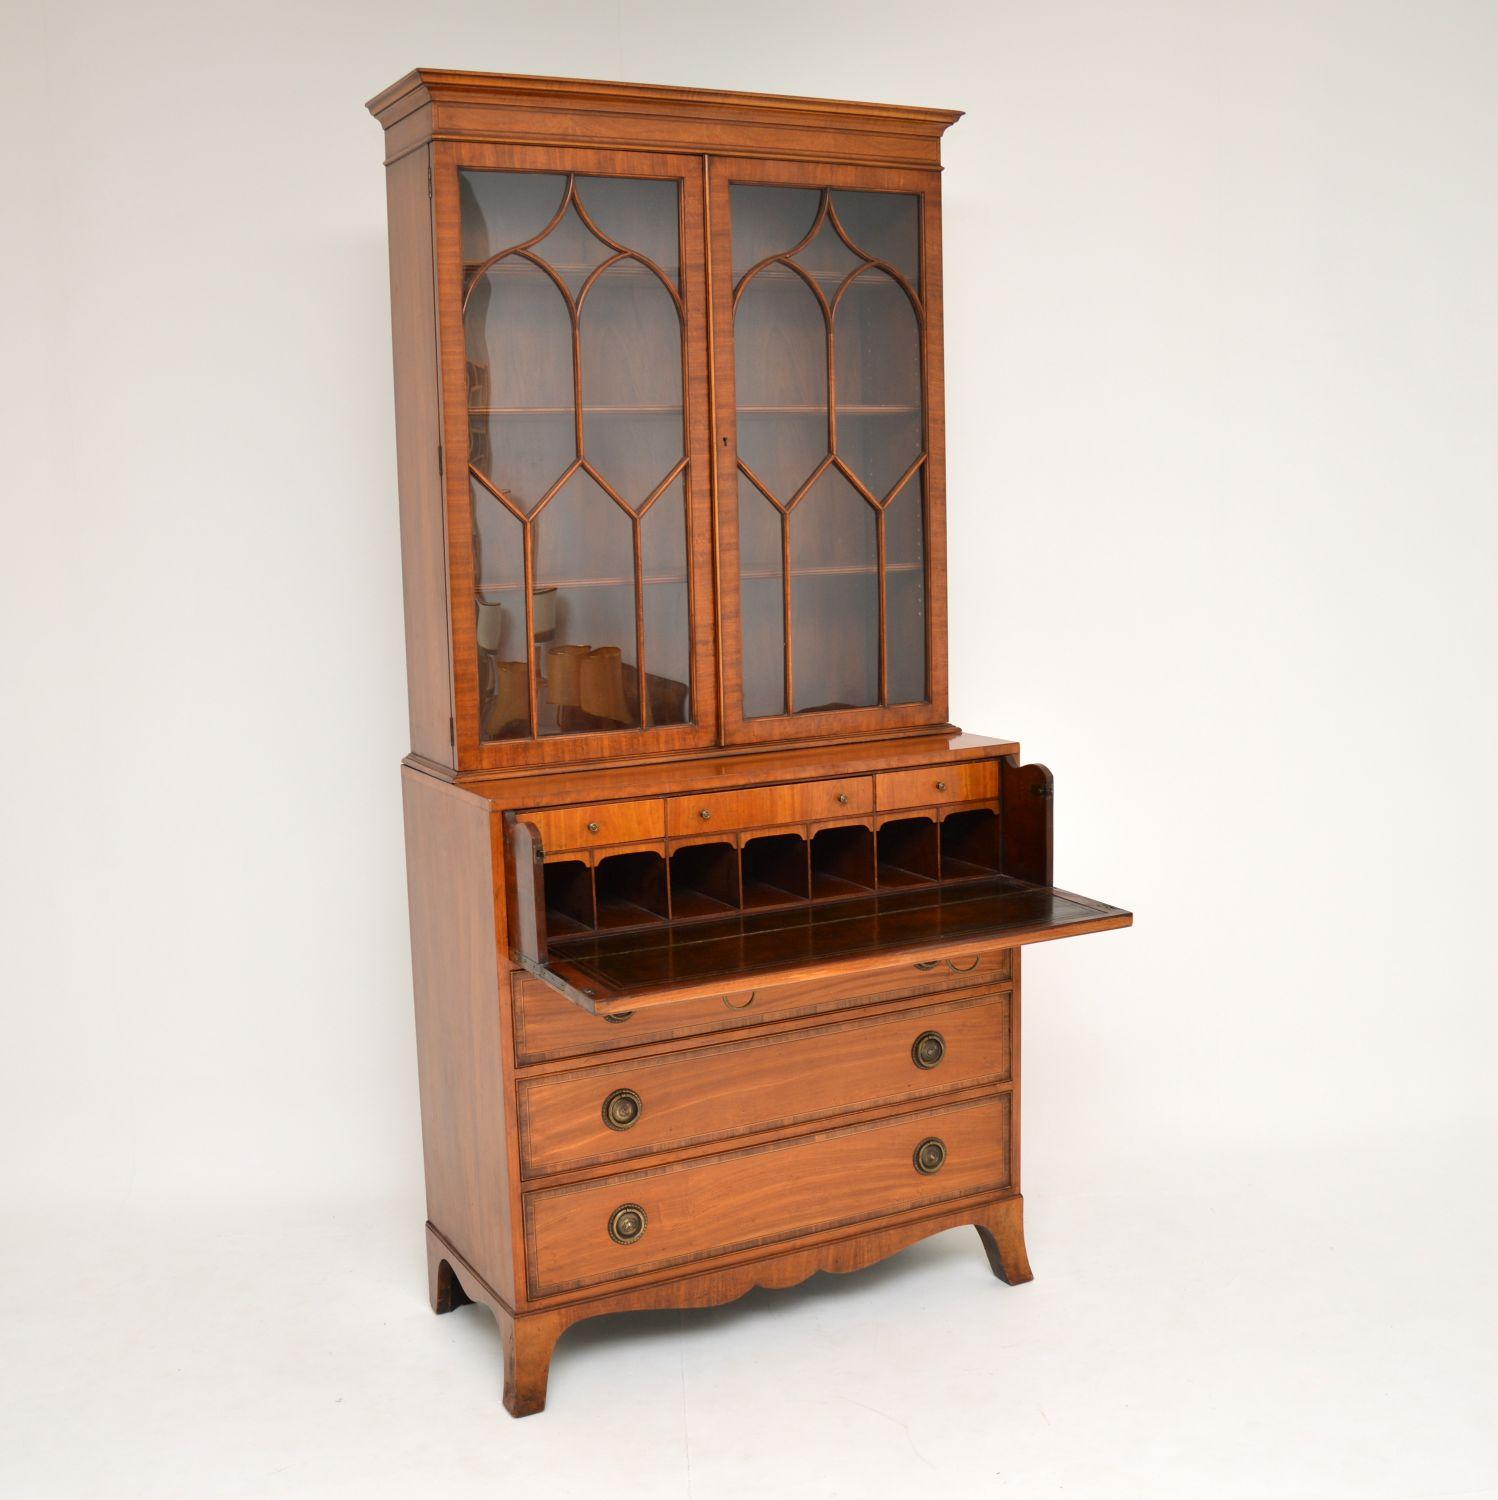 Impressive and extremely high quality antique Sheraton style satinwood secretaire bookcase in excellent condition and dating from circa 1930s period.

The top section has two astral-glazed doors and fully adjustable bookshelves inside. The top